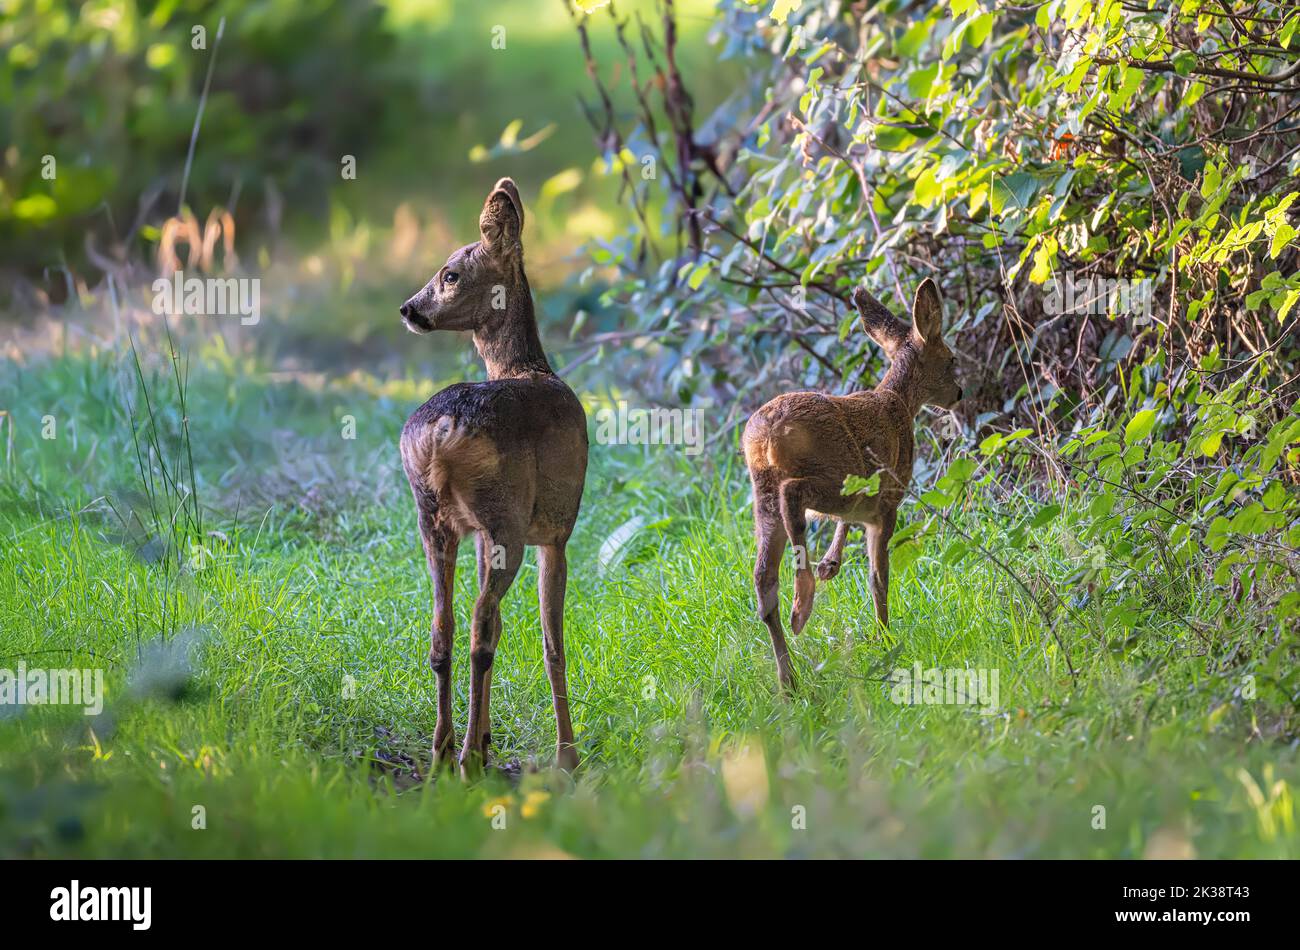 A Doe Roe Deer Capreolus capreolus with a kid in a North Norfolk woodland edge, UK Stock Photo